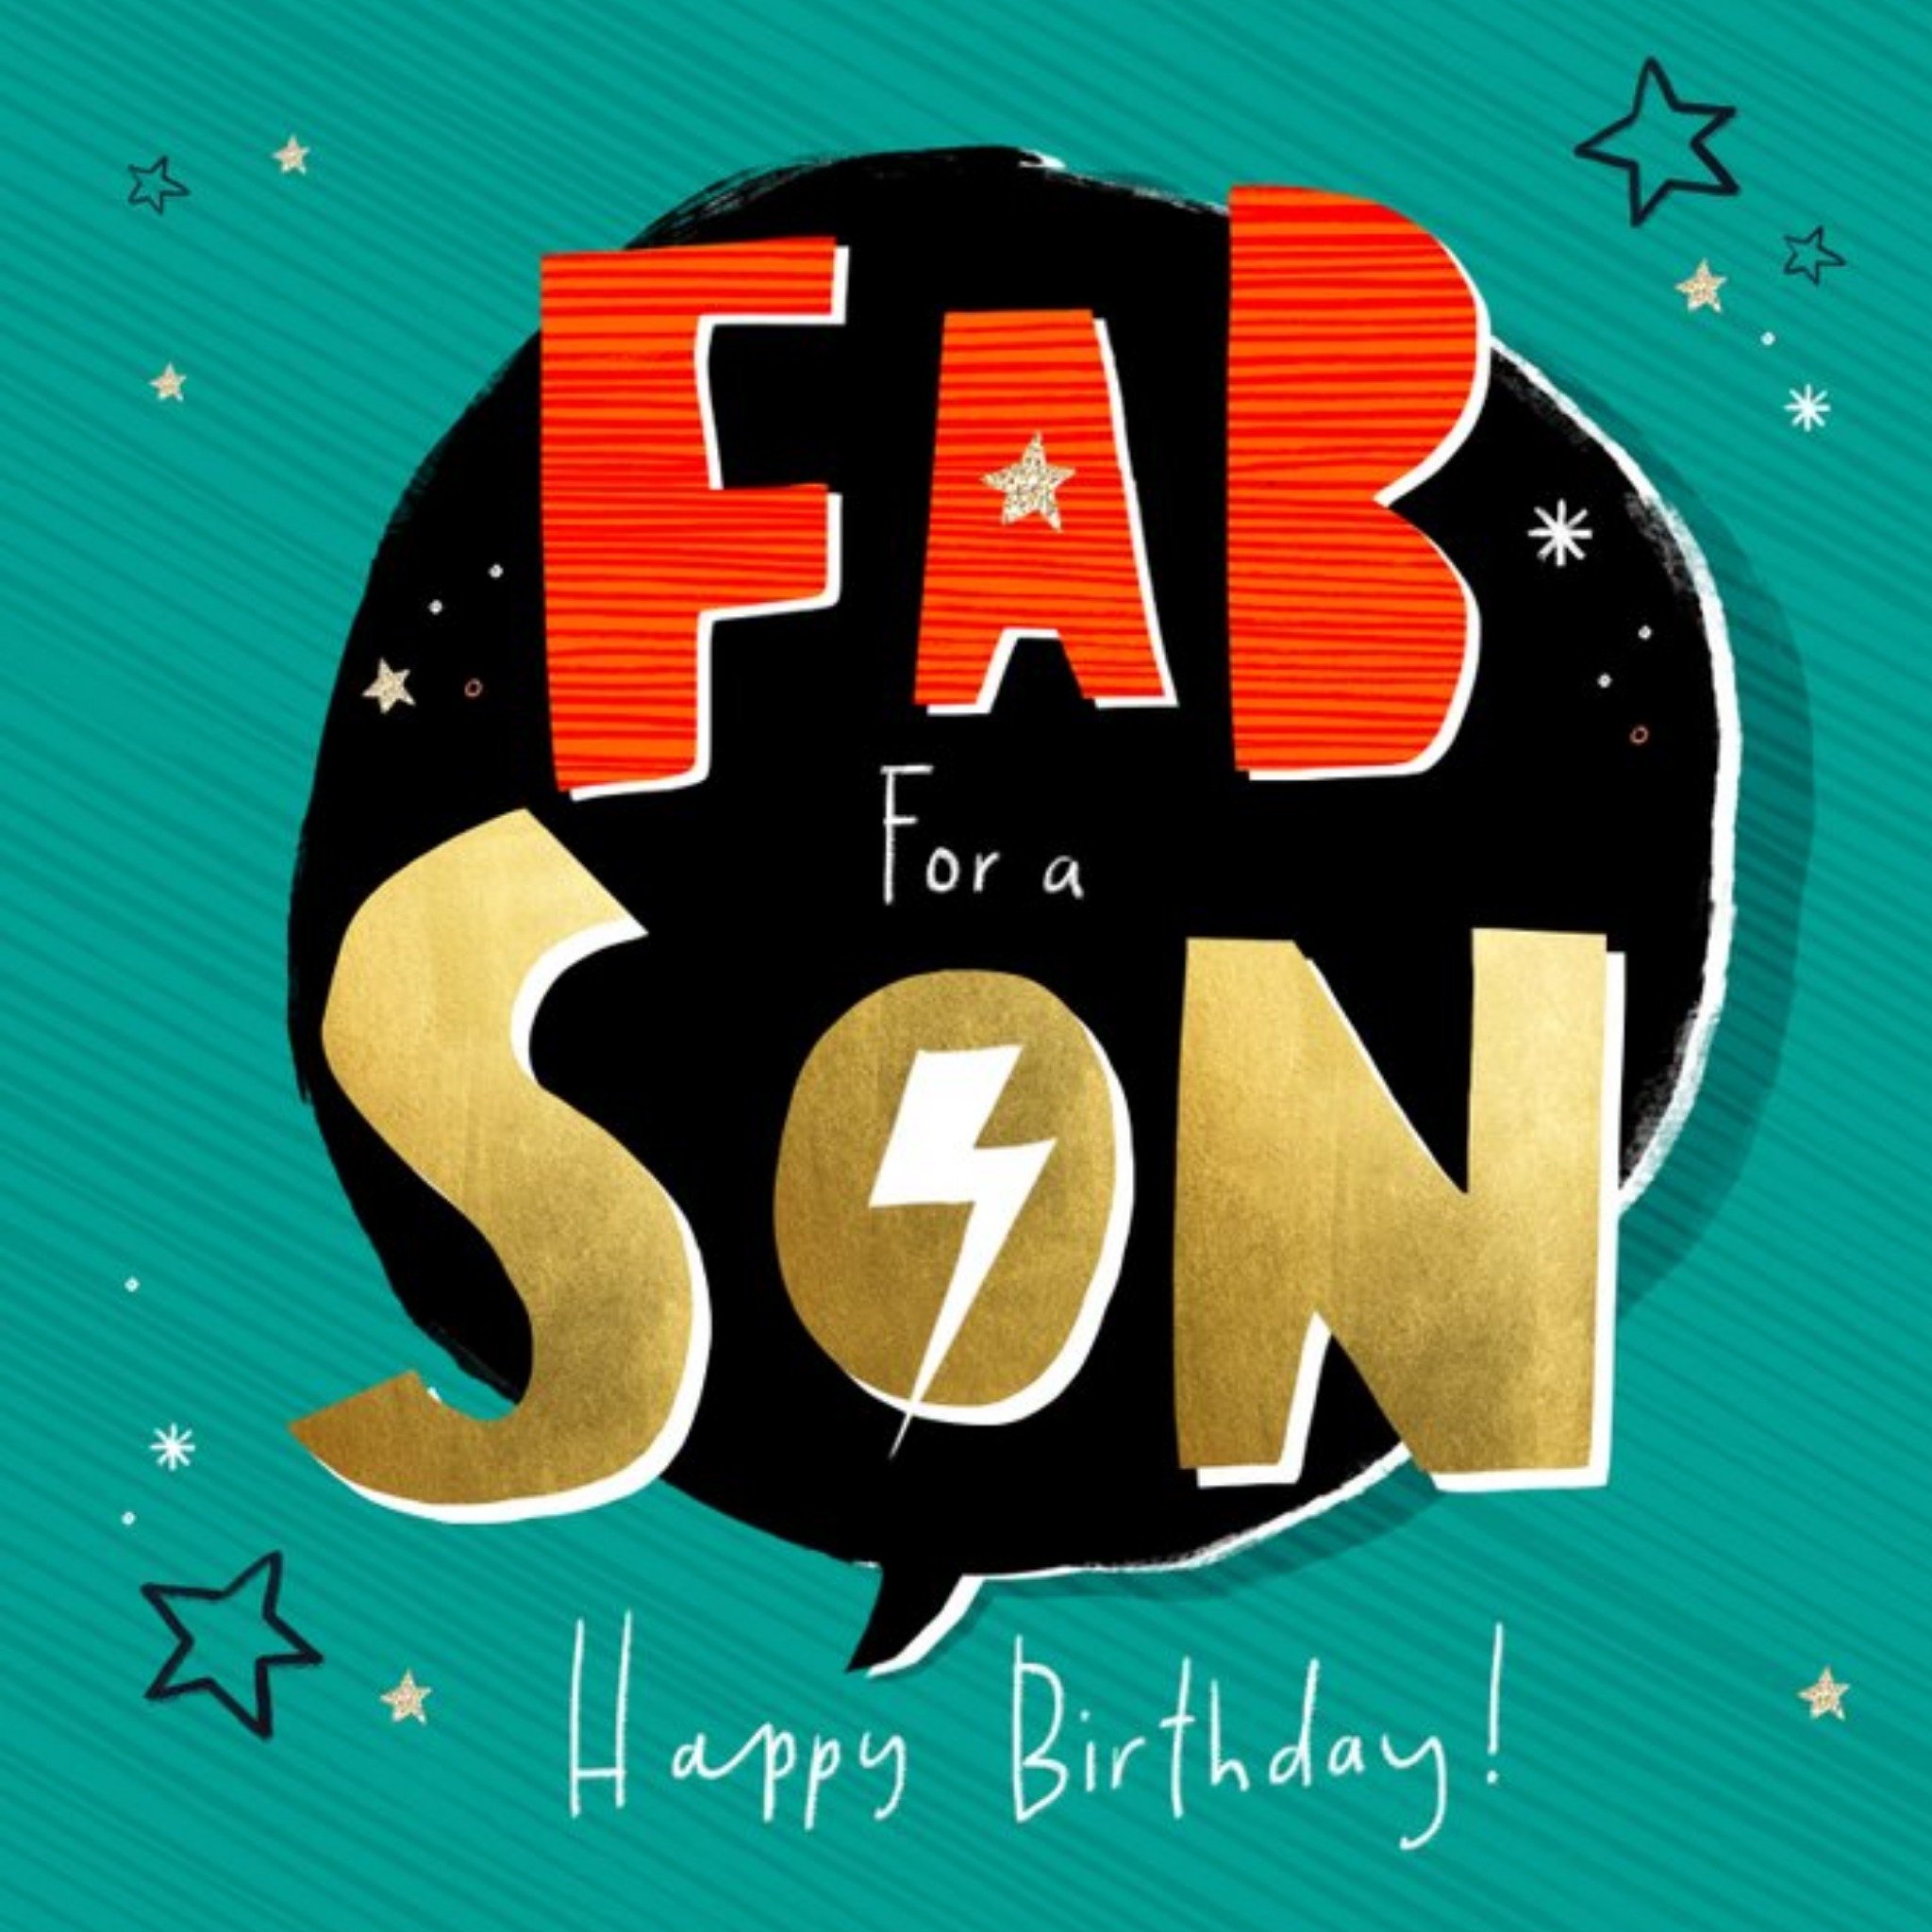 Moonpig Abstract Typographic Design For A Fab Son Happy Birthday Card, Large